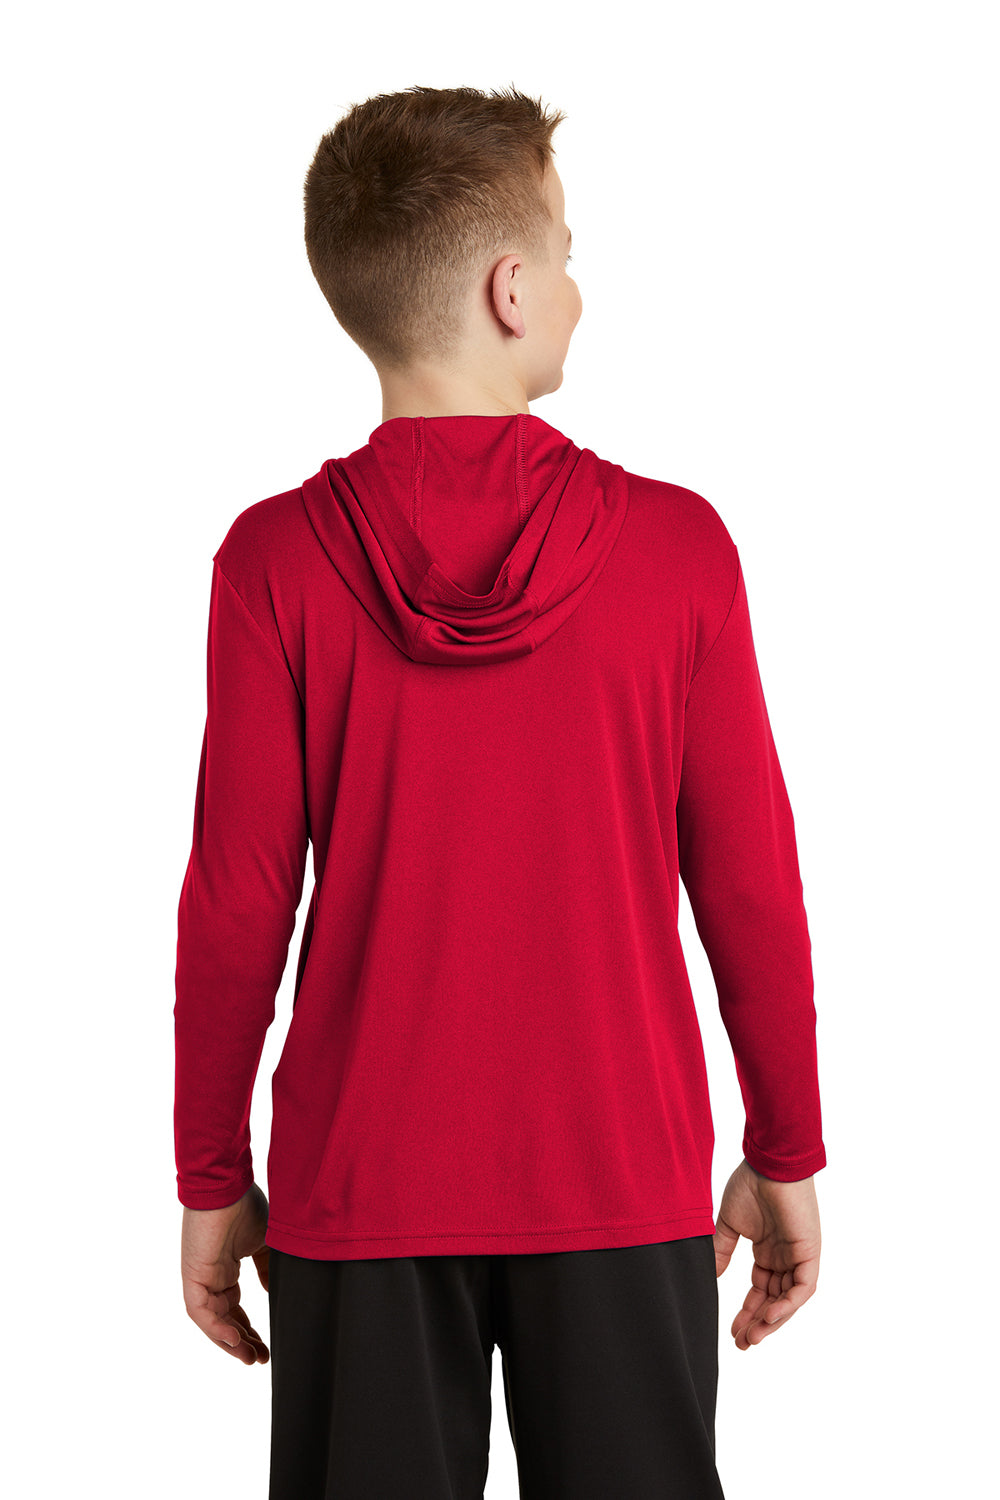 Sport-Tek YST358 Youth Competitor Moisture Wicking Long Sleeve Hooded T-Shirt Hoodie True Red Back